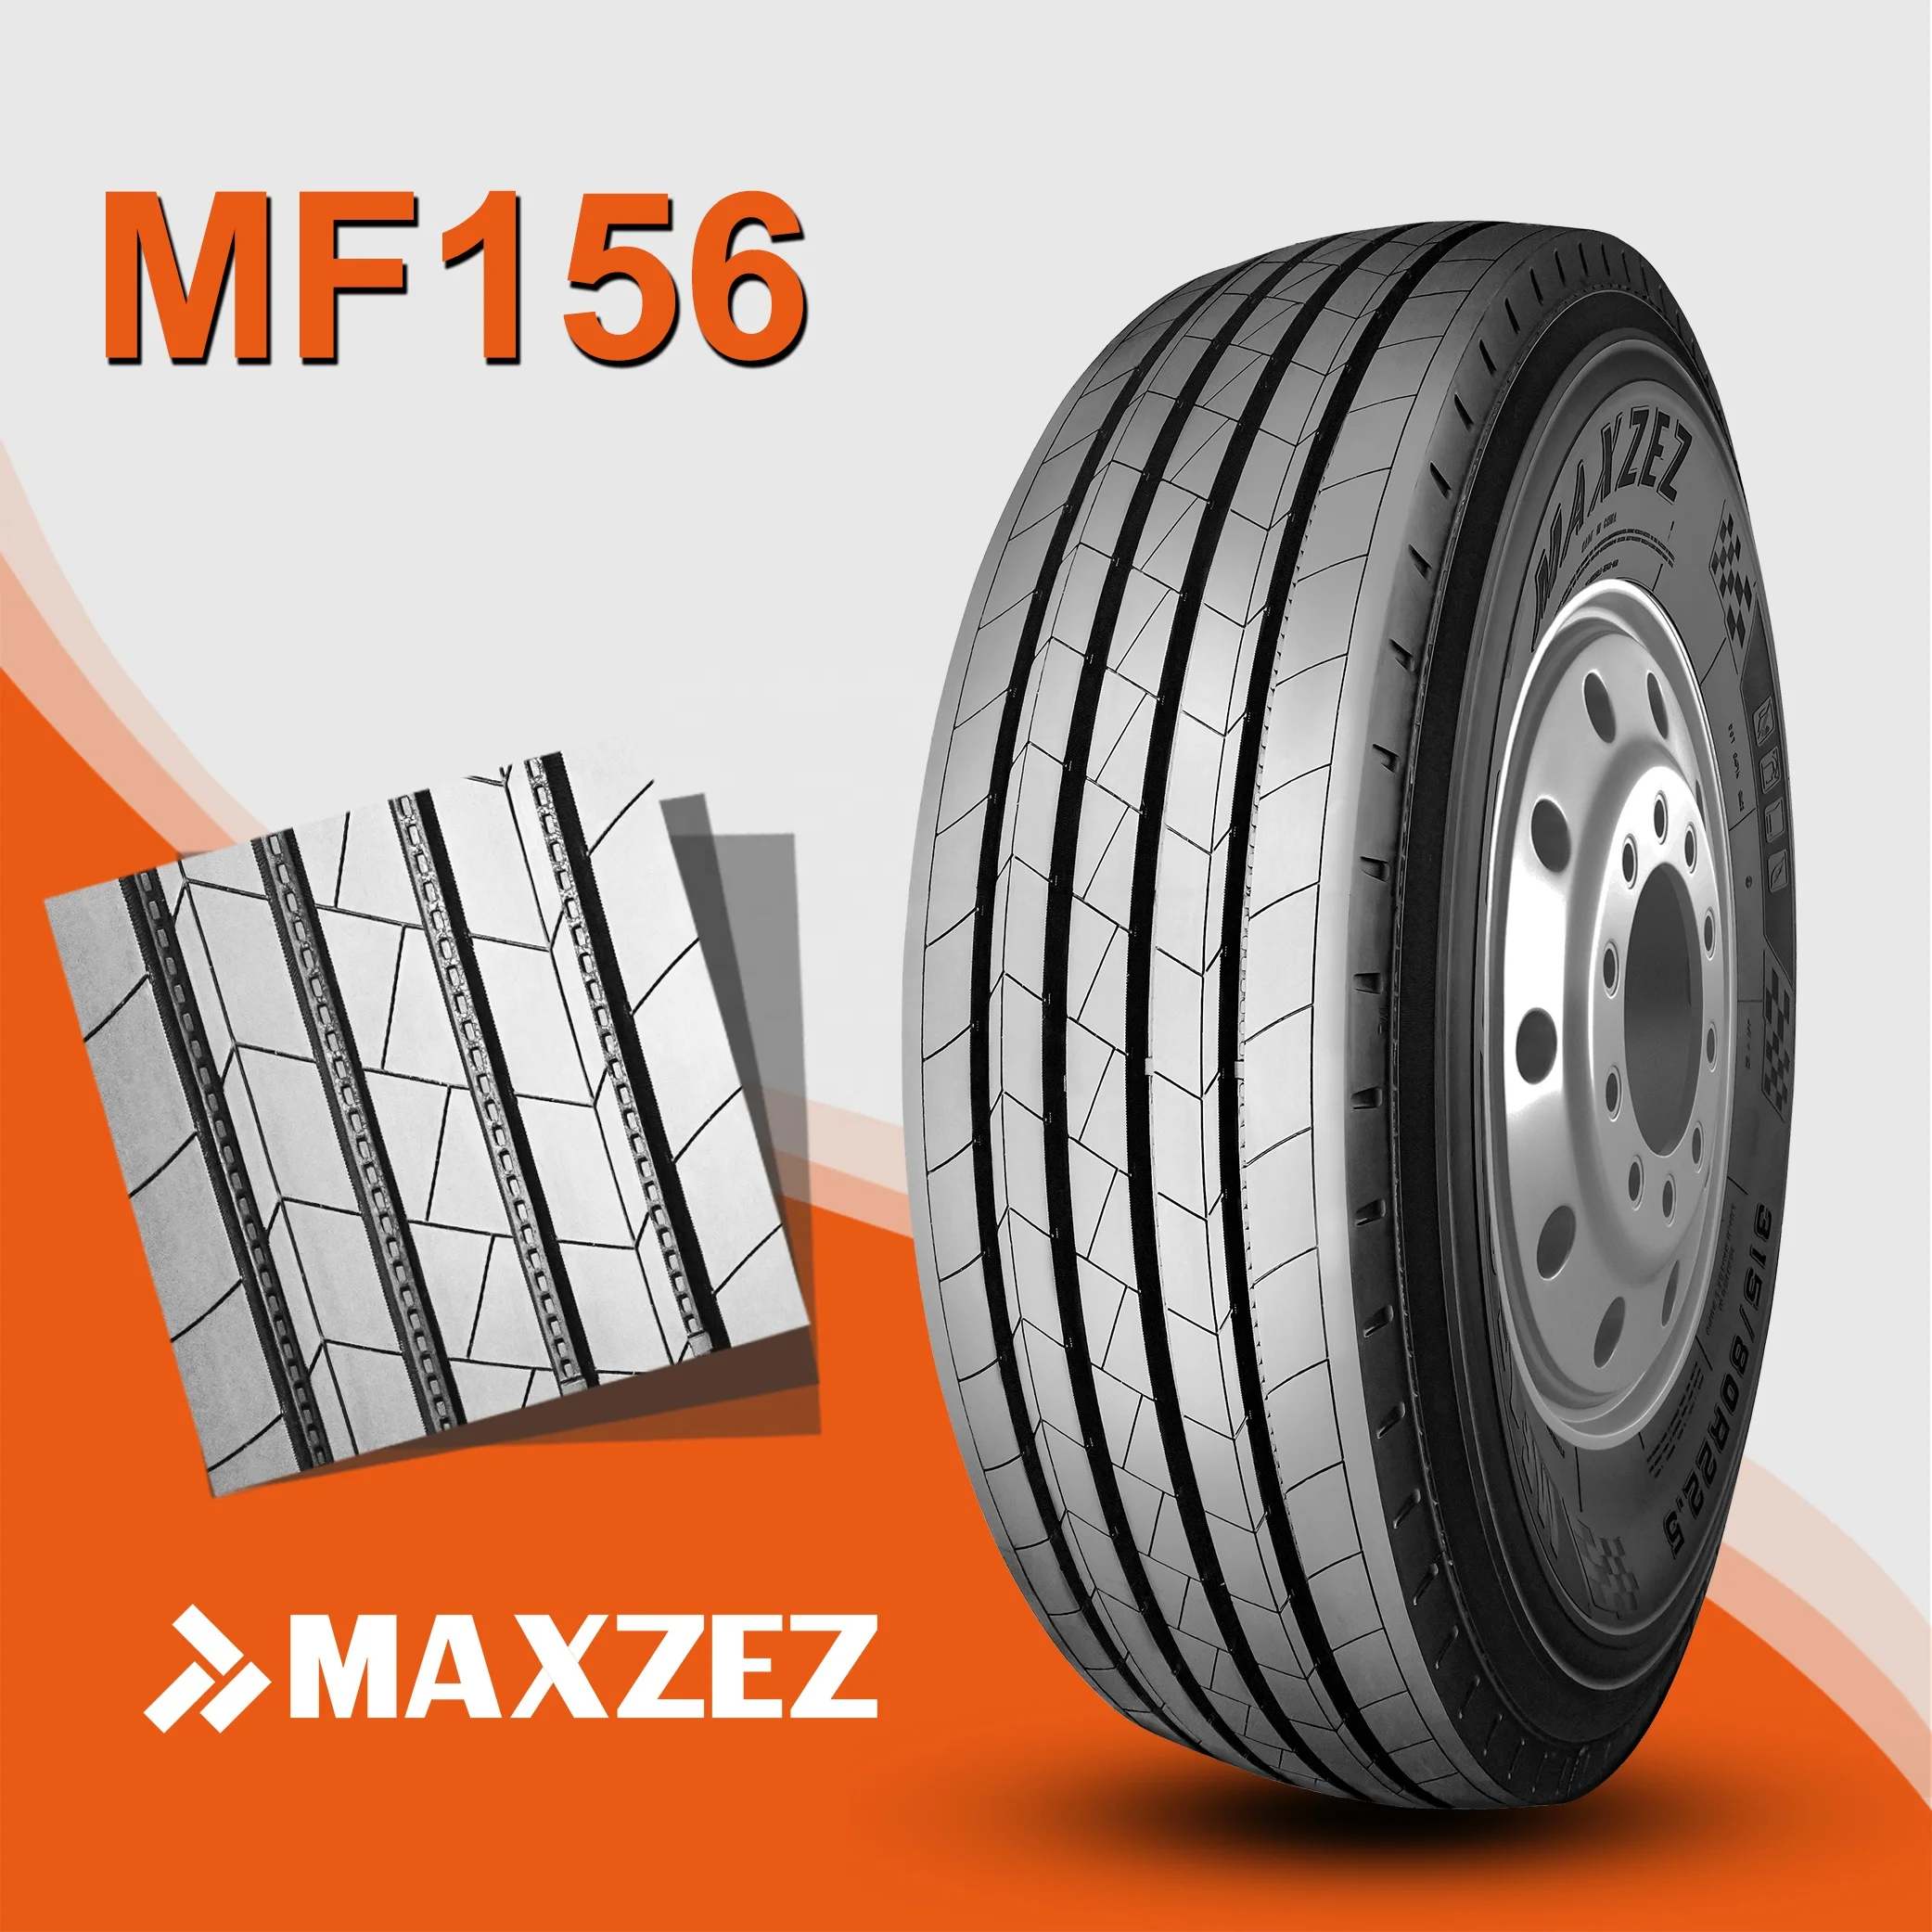 Maxzez 385/65r22.5 Chinese Brand New Tire Manufacture In China Factory  Price Tyres For Vehicles - Buy 385/65r22.5,Tire Manufacture's In  China,Factory Price Product on Alibaba.com